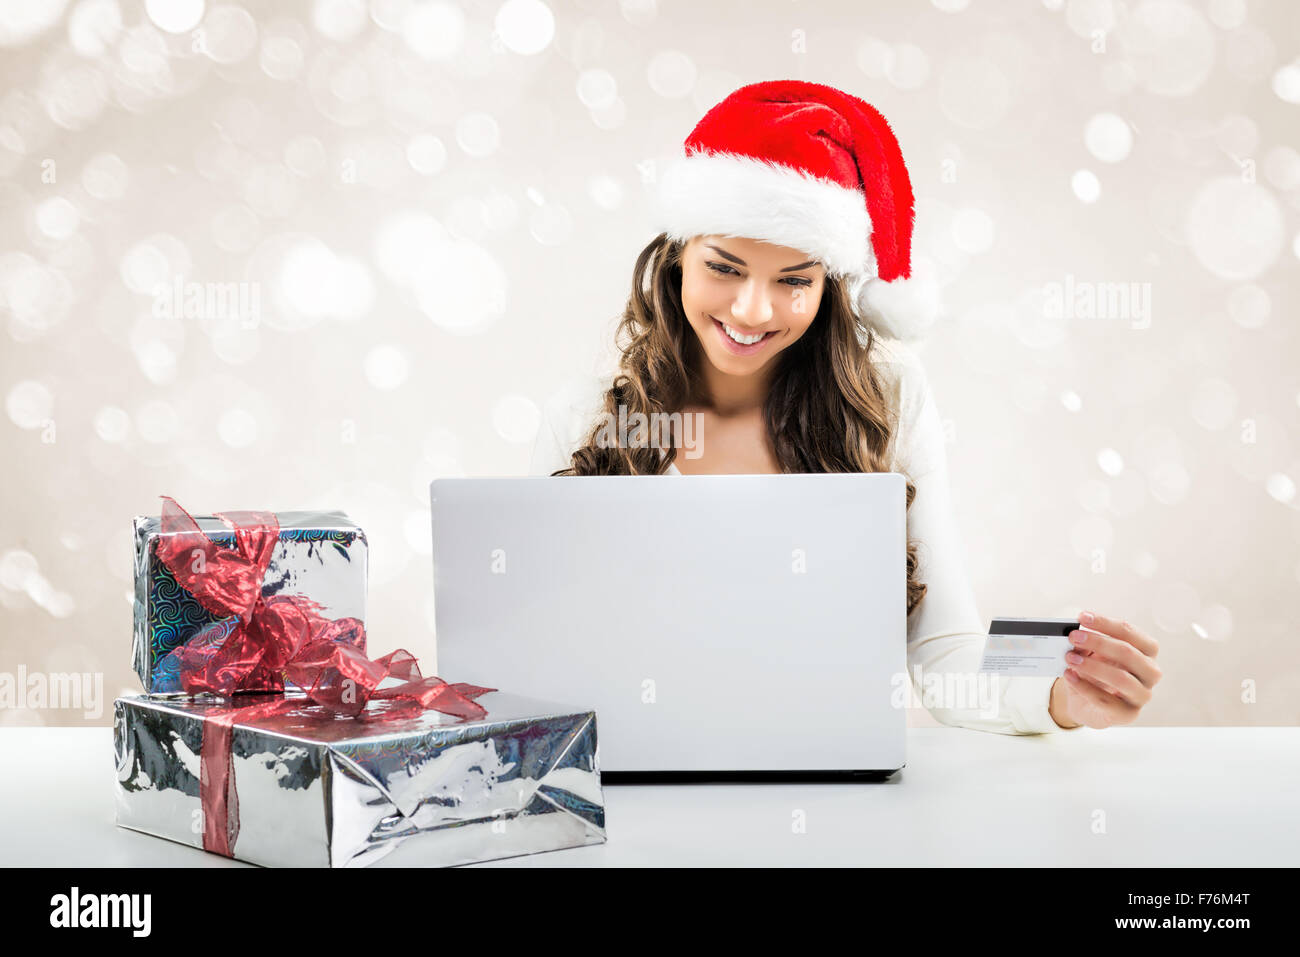 Business Woman working in Santa Claus hat Banque D'Images